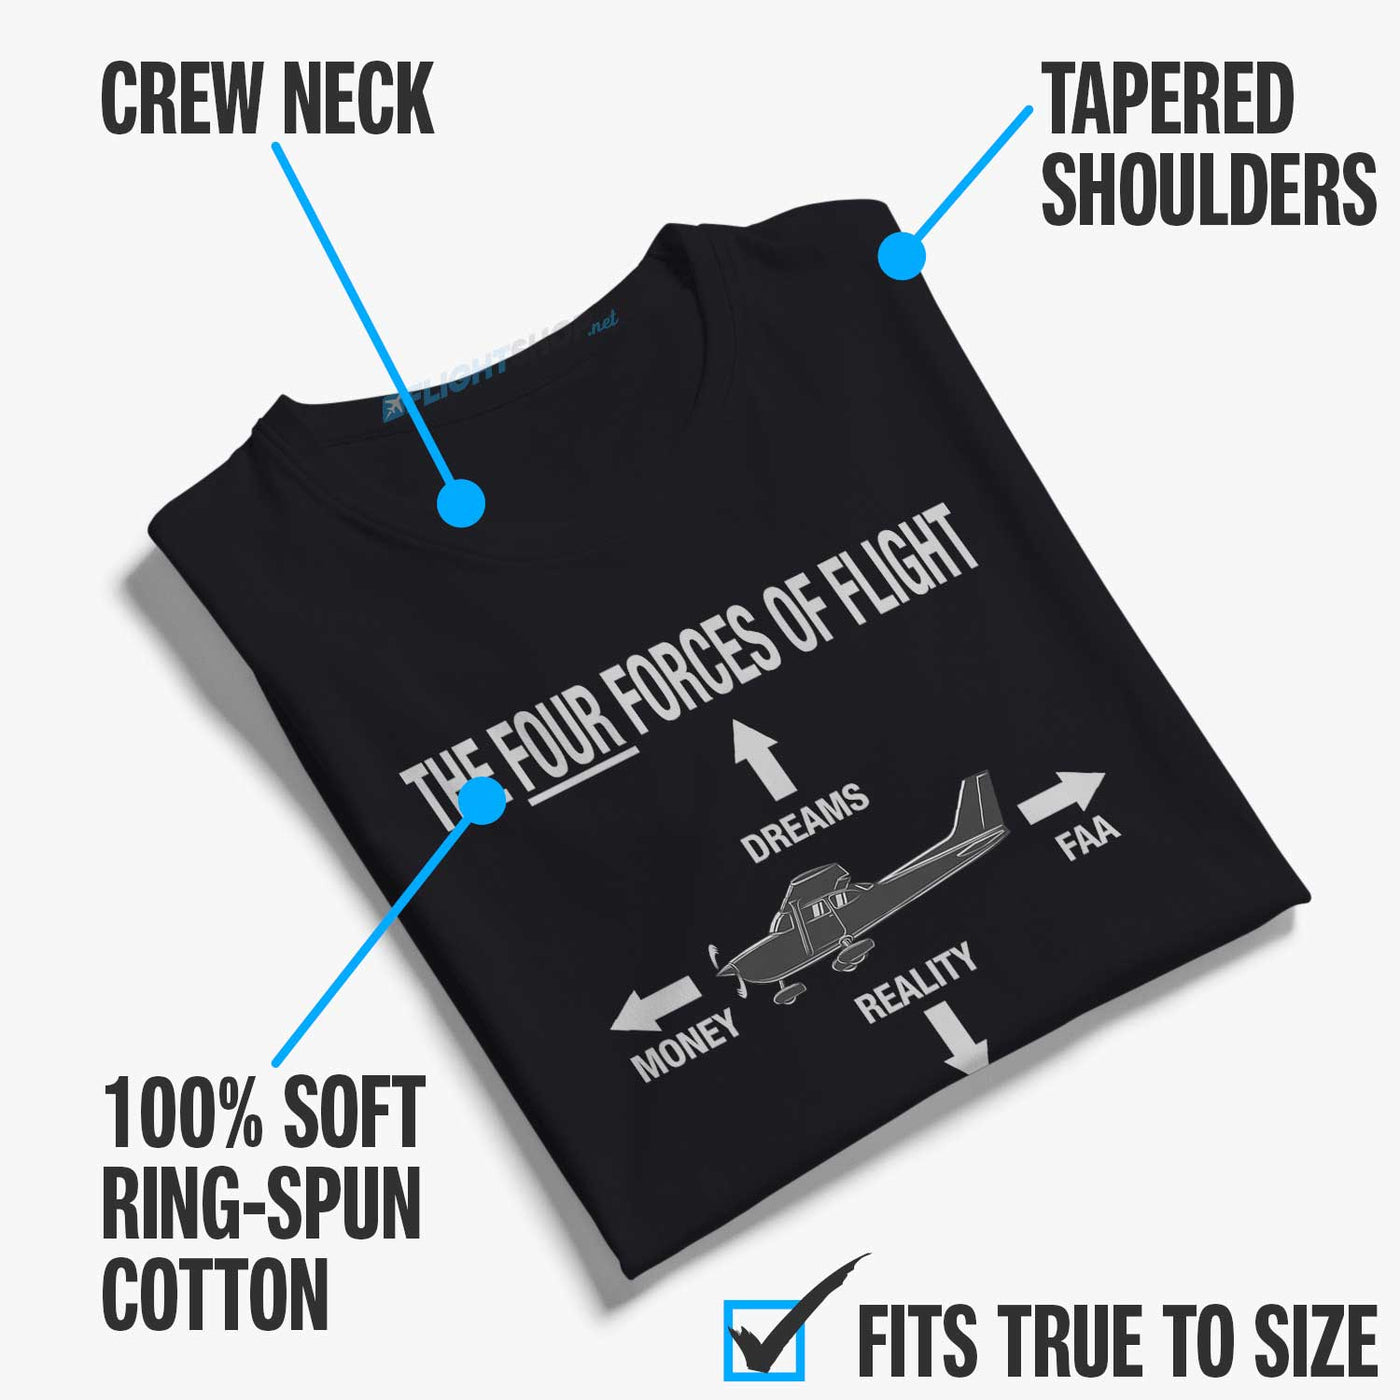 The Four Forces of Flight T-Shirt